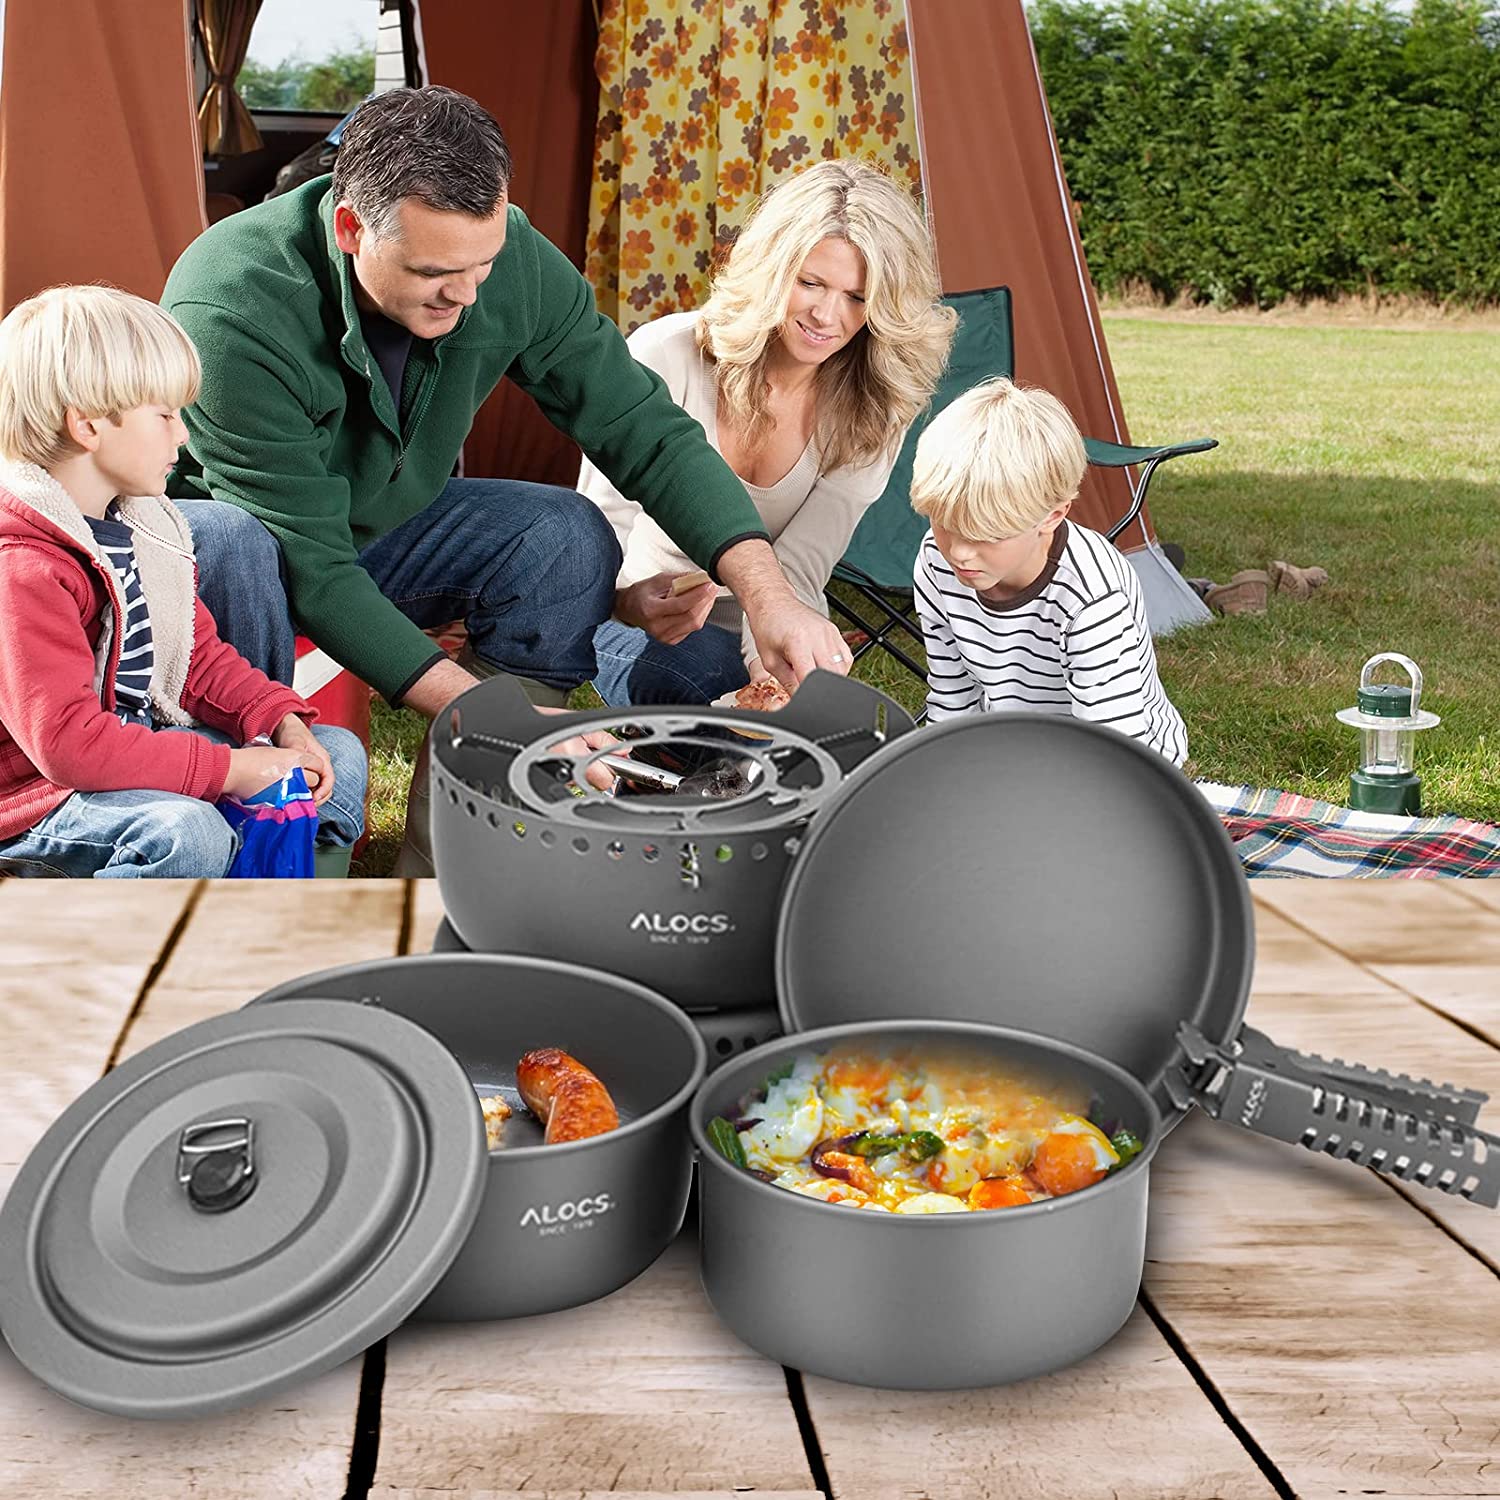 ALOCS Cookware Pots And Pans Set With Alcohol Stove